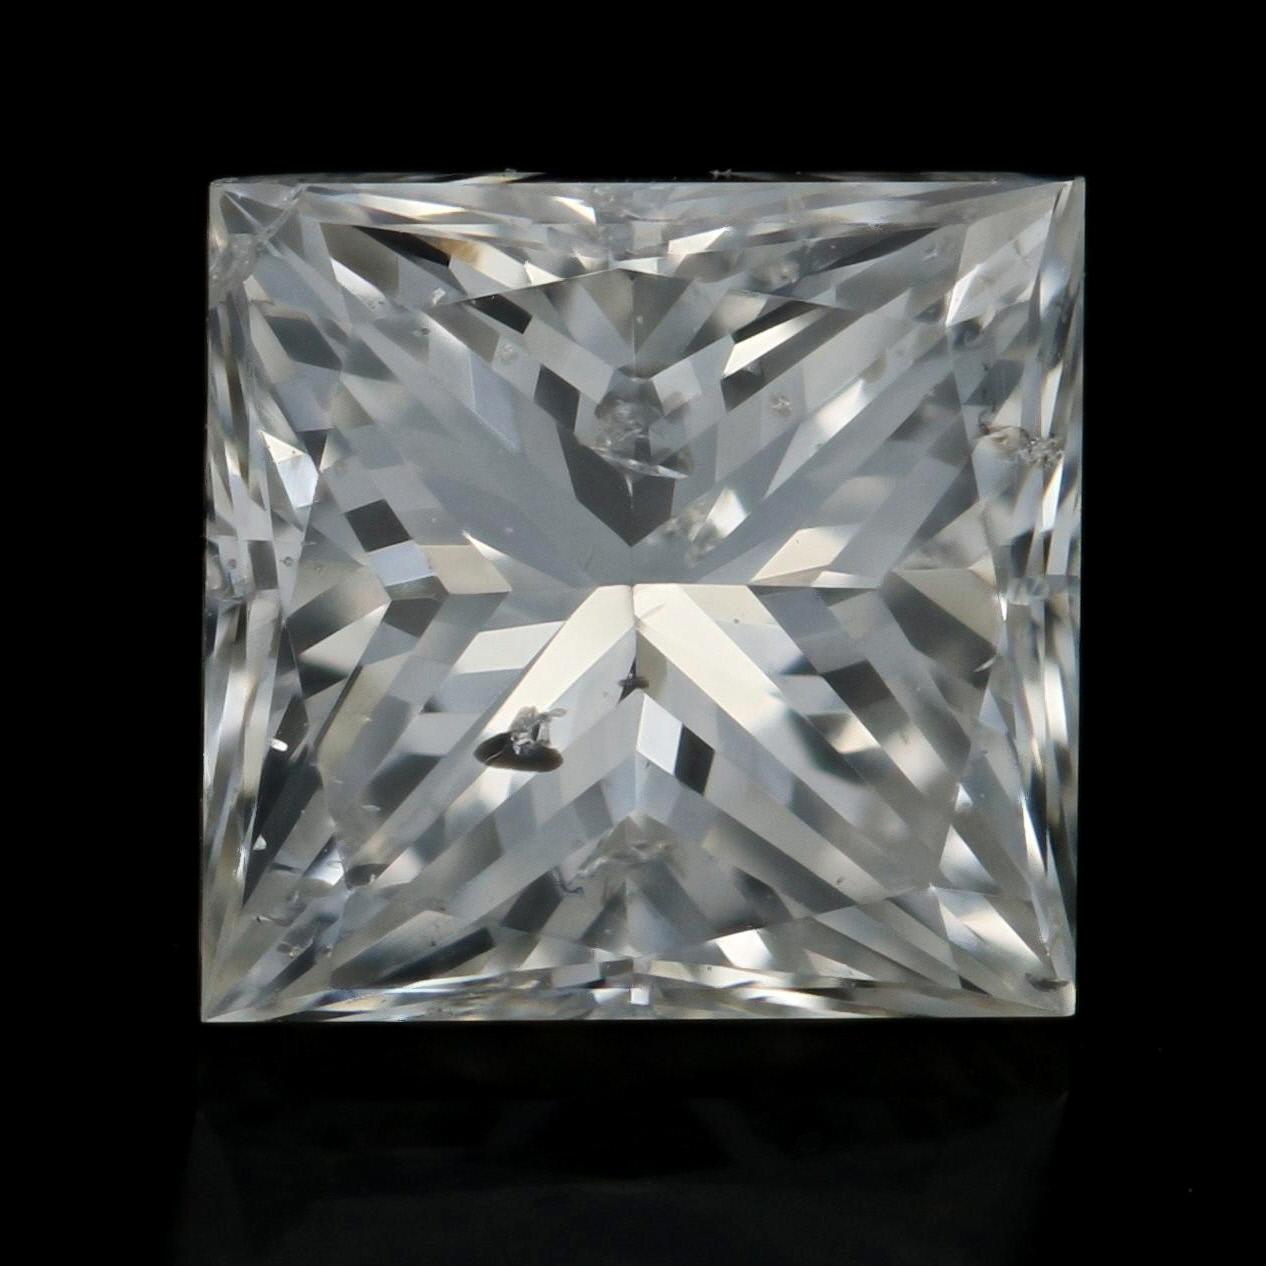 Weight: 1.06ct
Cut: Princess 
Color: J   
Clarity: SI2 
Dimensions (mm): 5.58 x 5.38 x 4.07 

GIA Report Number: 5181404248 

Condition: New  

Please check out the enlarged pictures.

Thank you for taking the time to read our description. If you